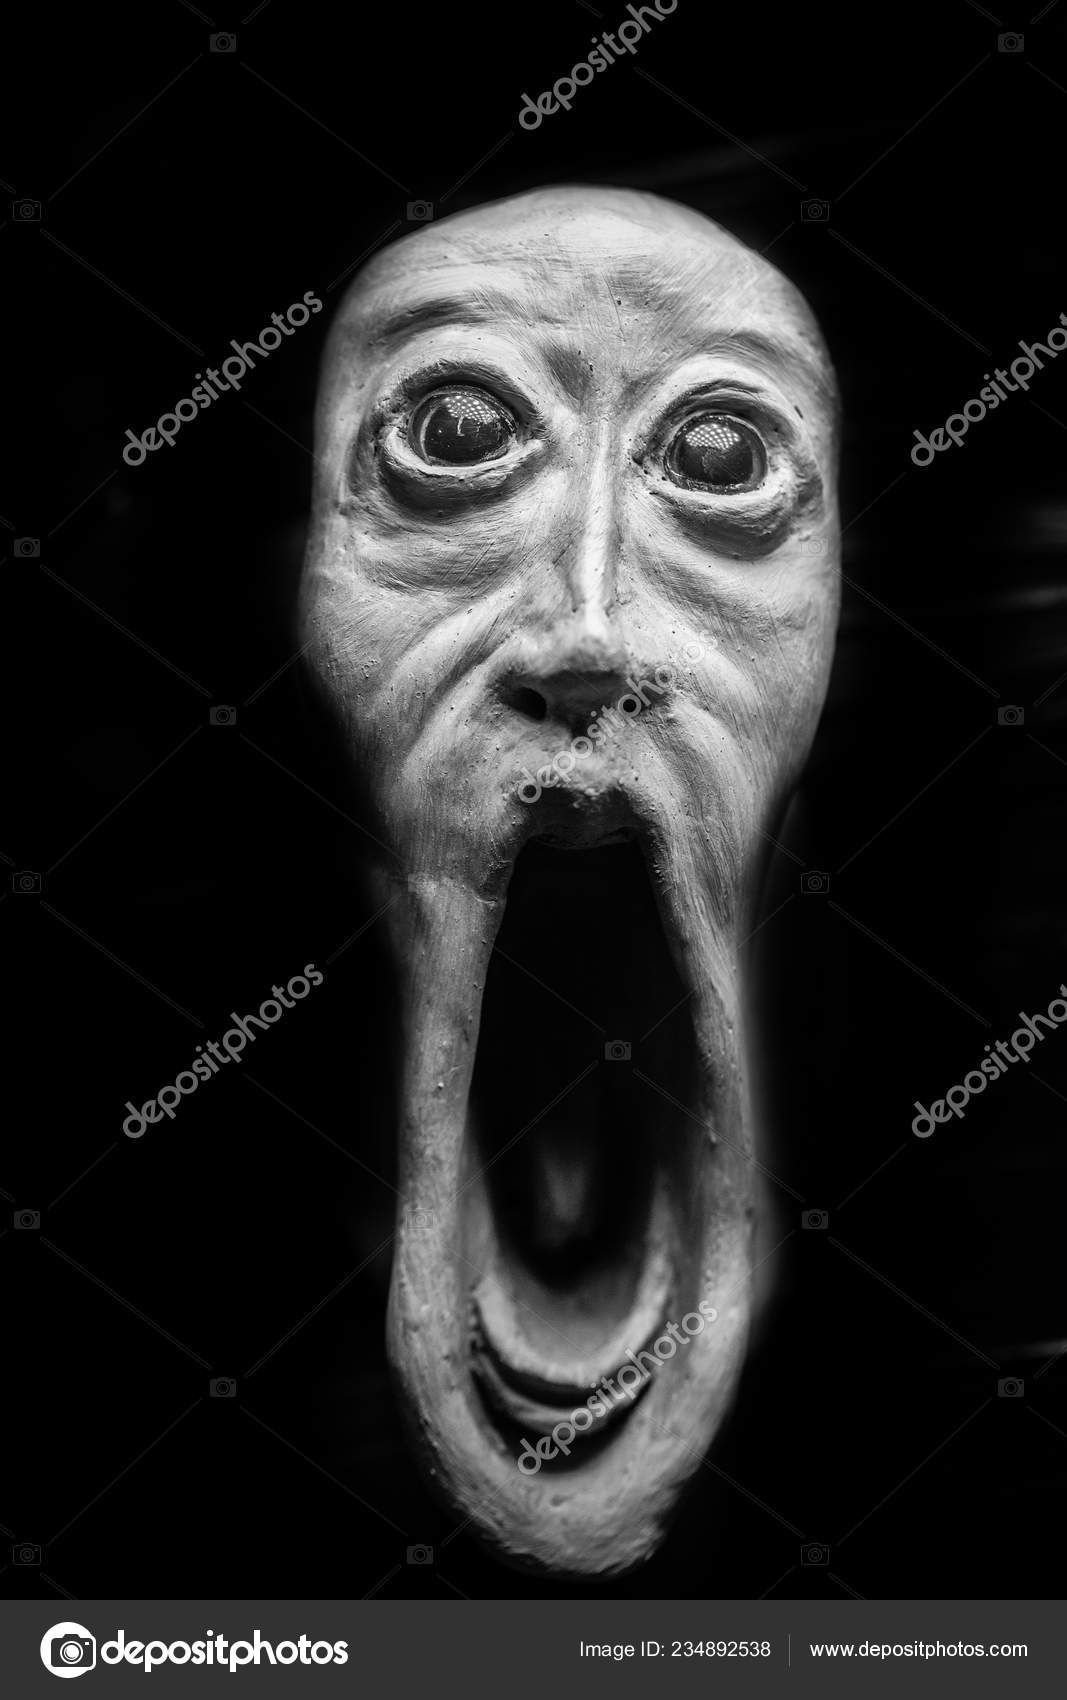 120+ Scared Face Meme Stock Photos, Pictures & Royalty-Free Images